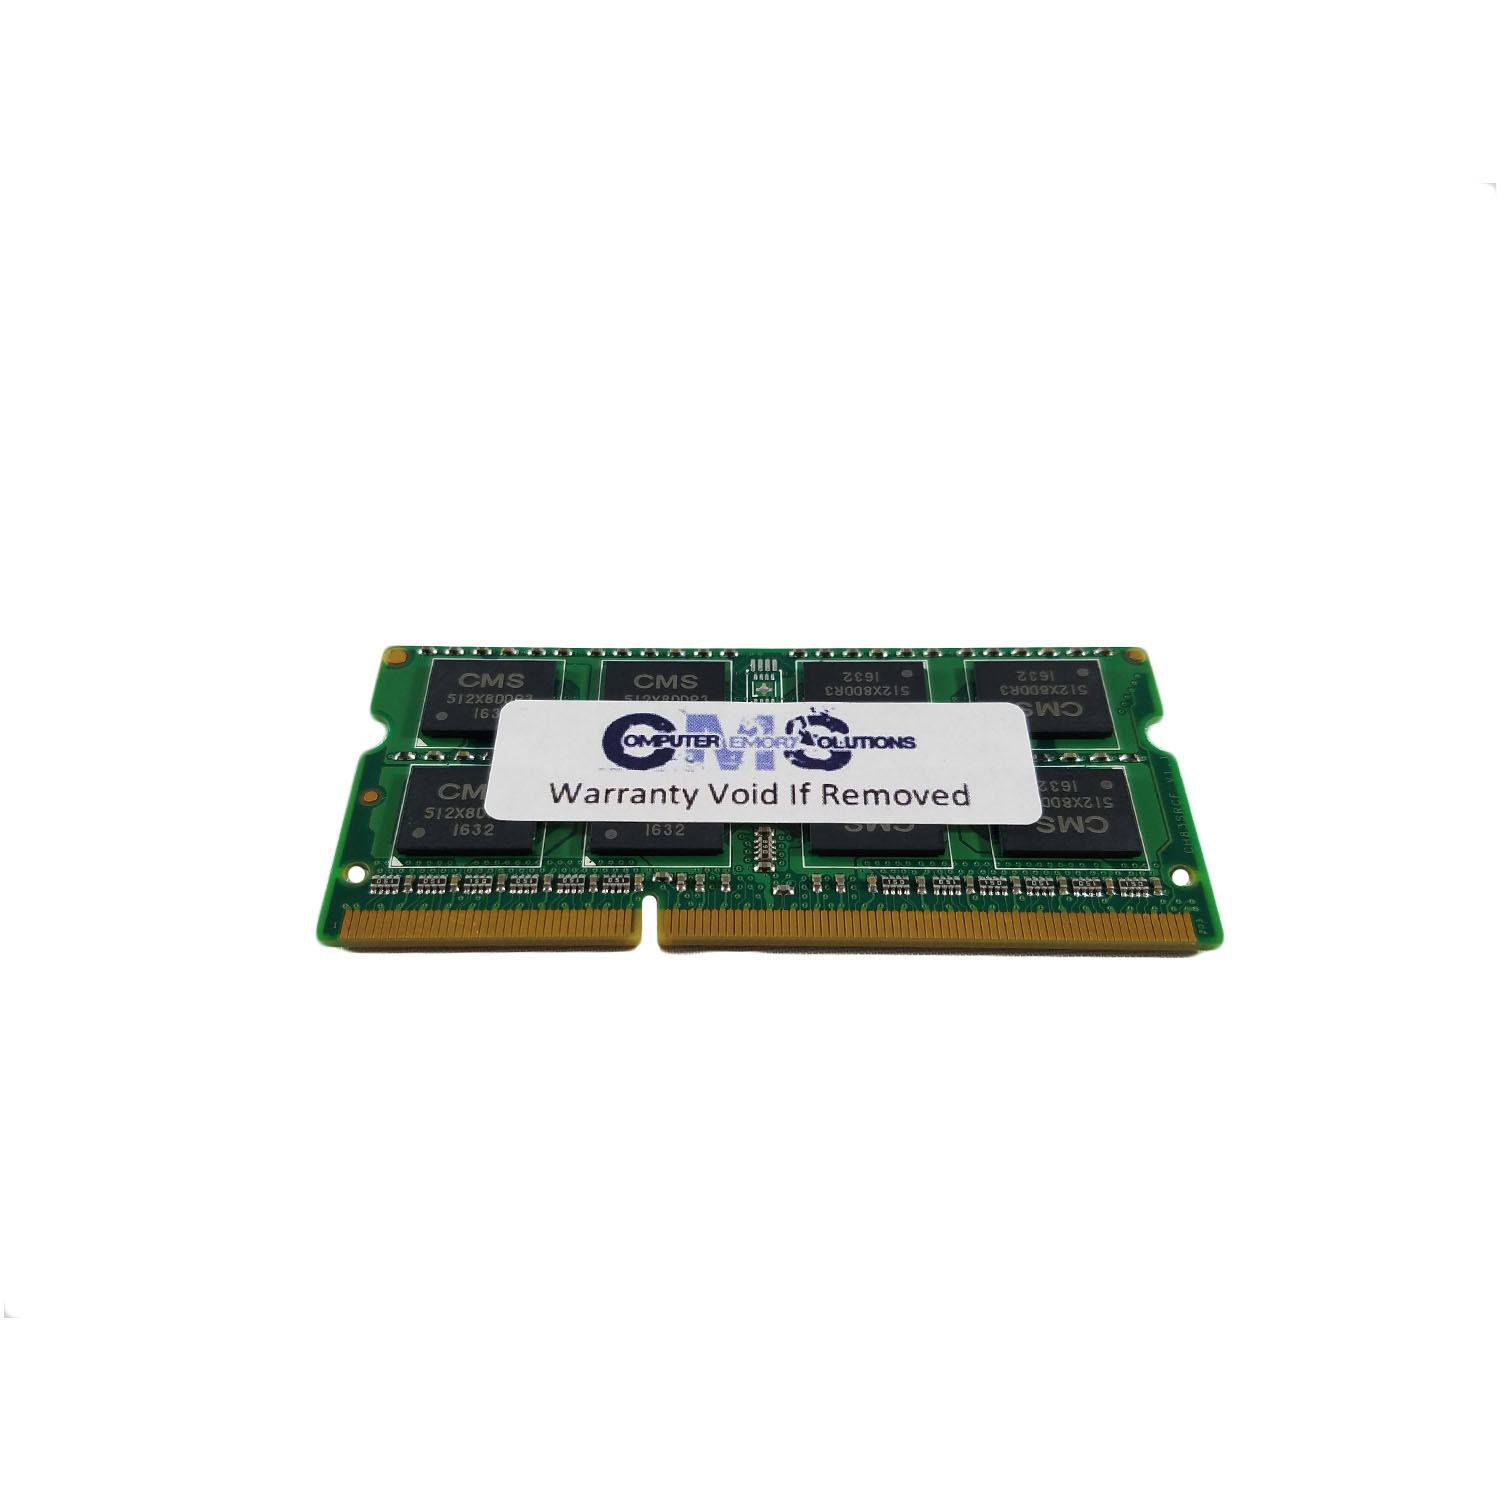 CMS 4GB (1X4GB) DDR3 8500 1066MHZ NON ECC SODIMM Memory Ram Upgrade Compatible with Asus/Asmobile® Eee Slate Ep121 Netbook - A32 - image 2 of 2